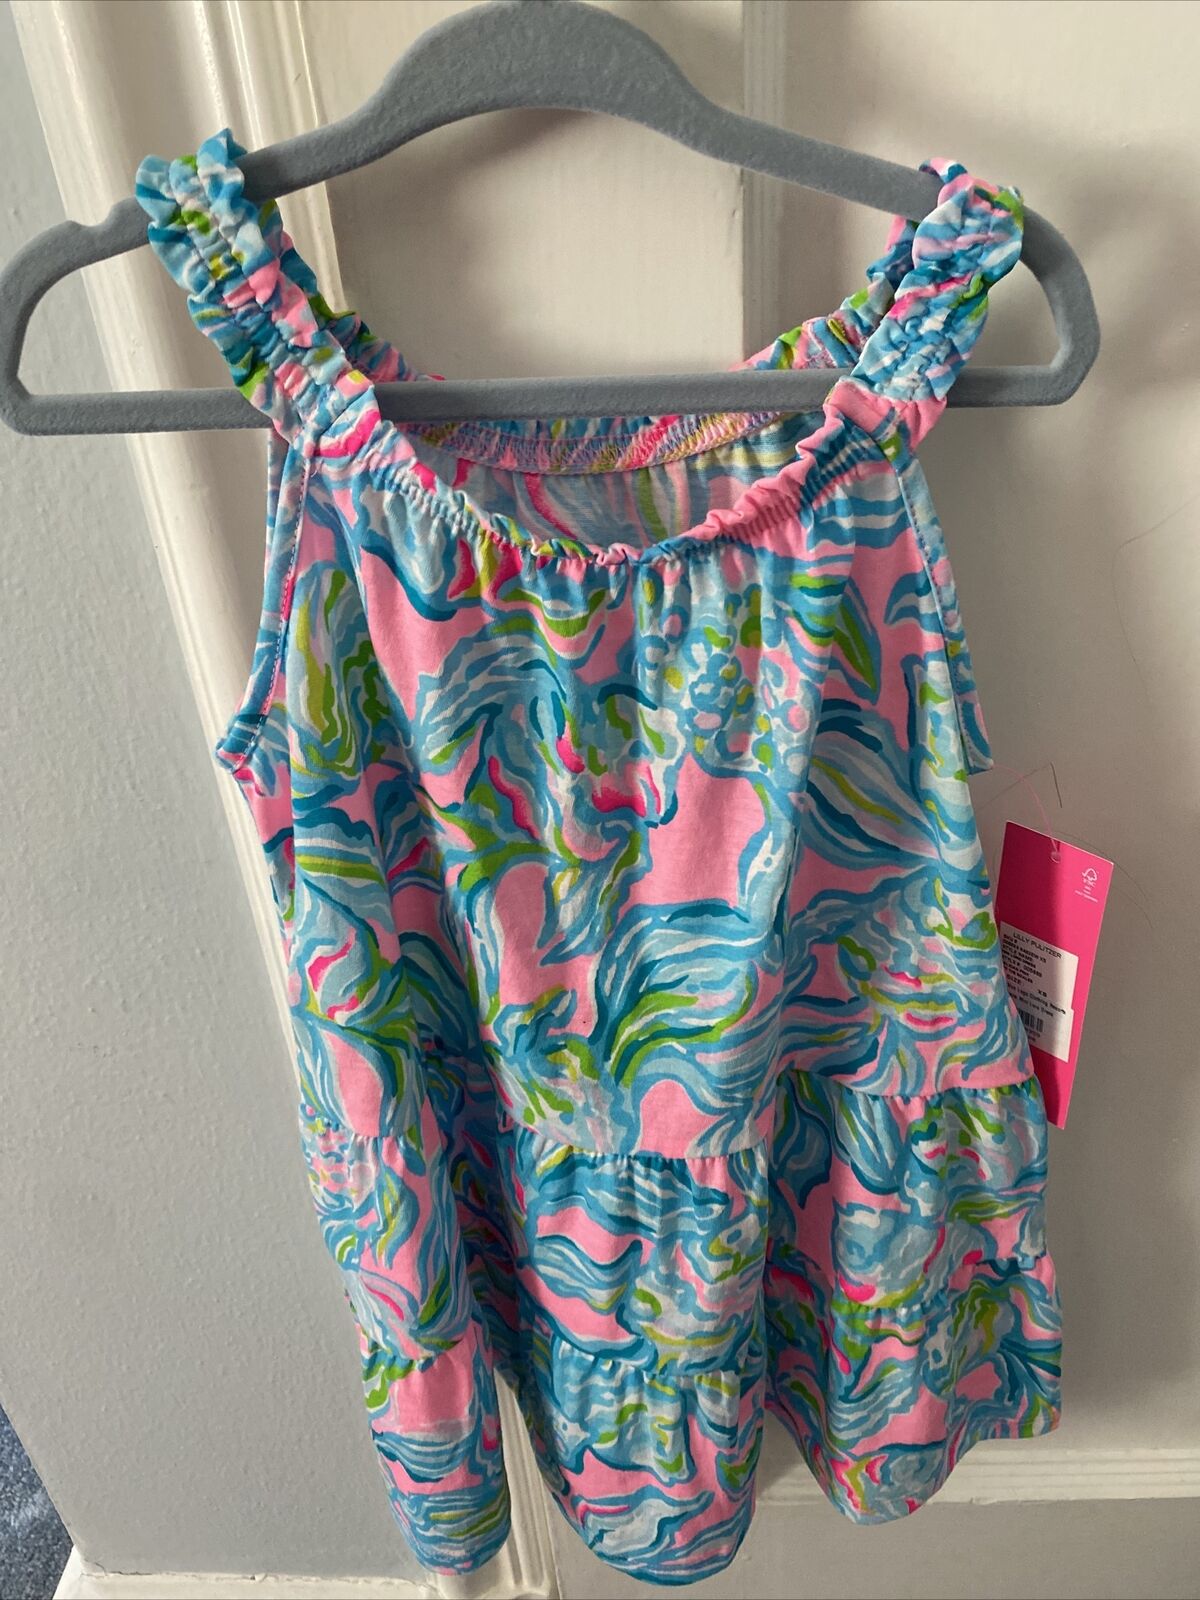 Lilly Pulitzer Toddler girl’s dress XS (2-3 T)